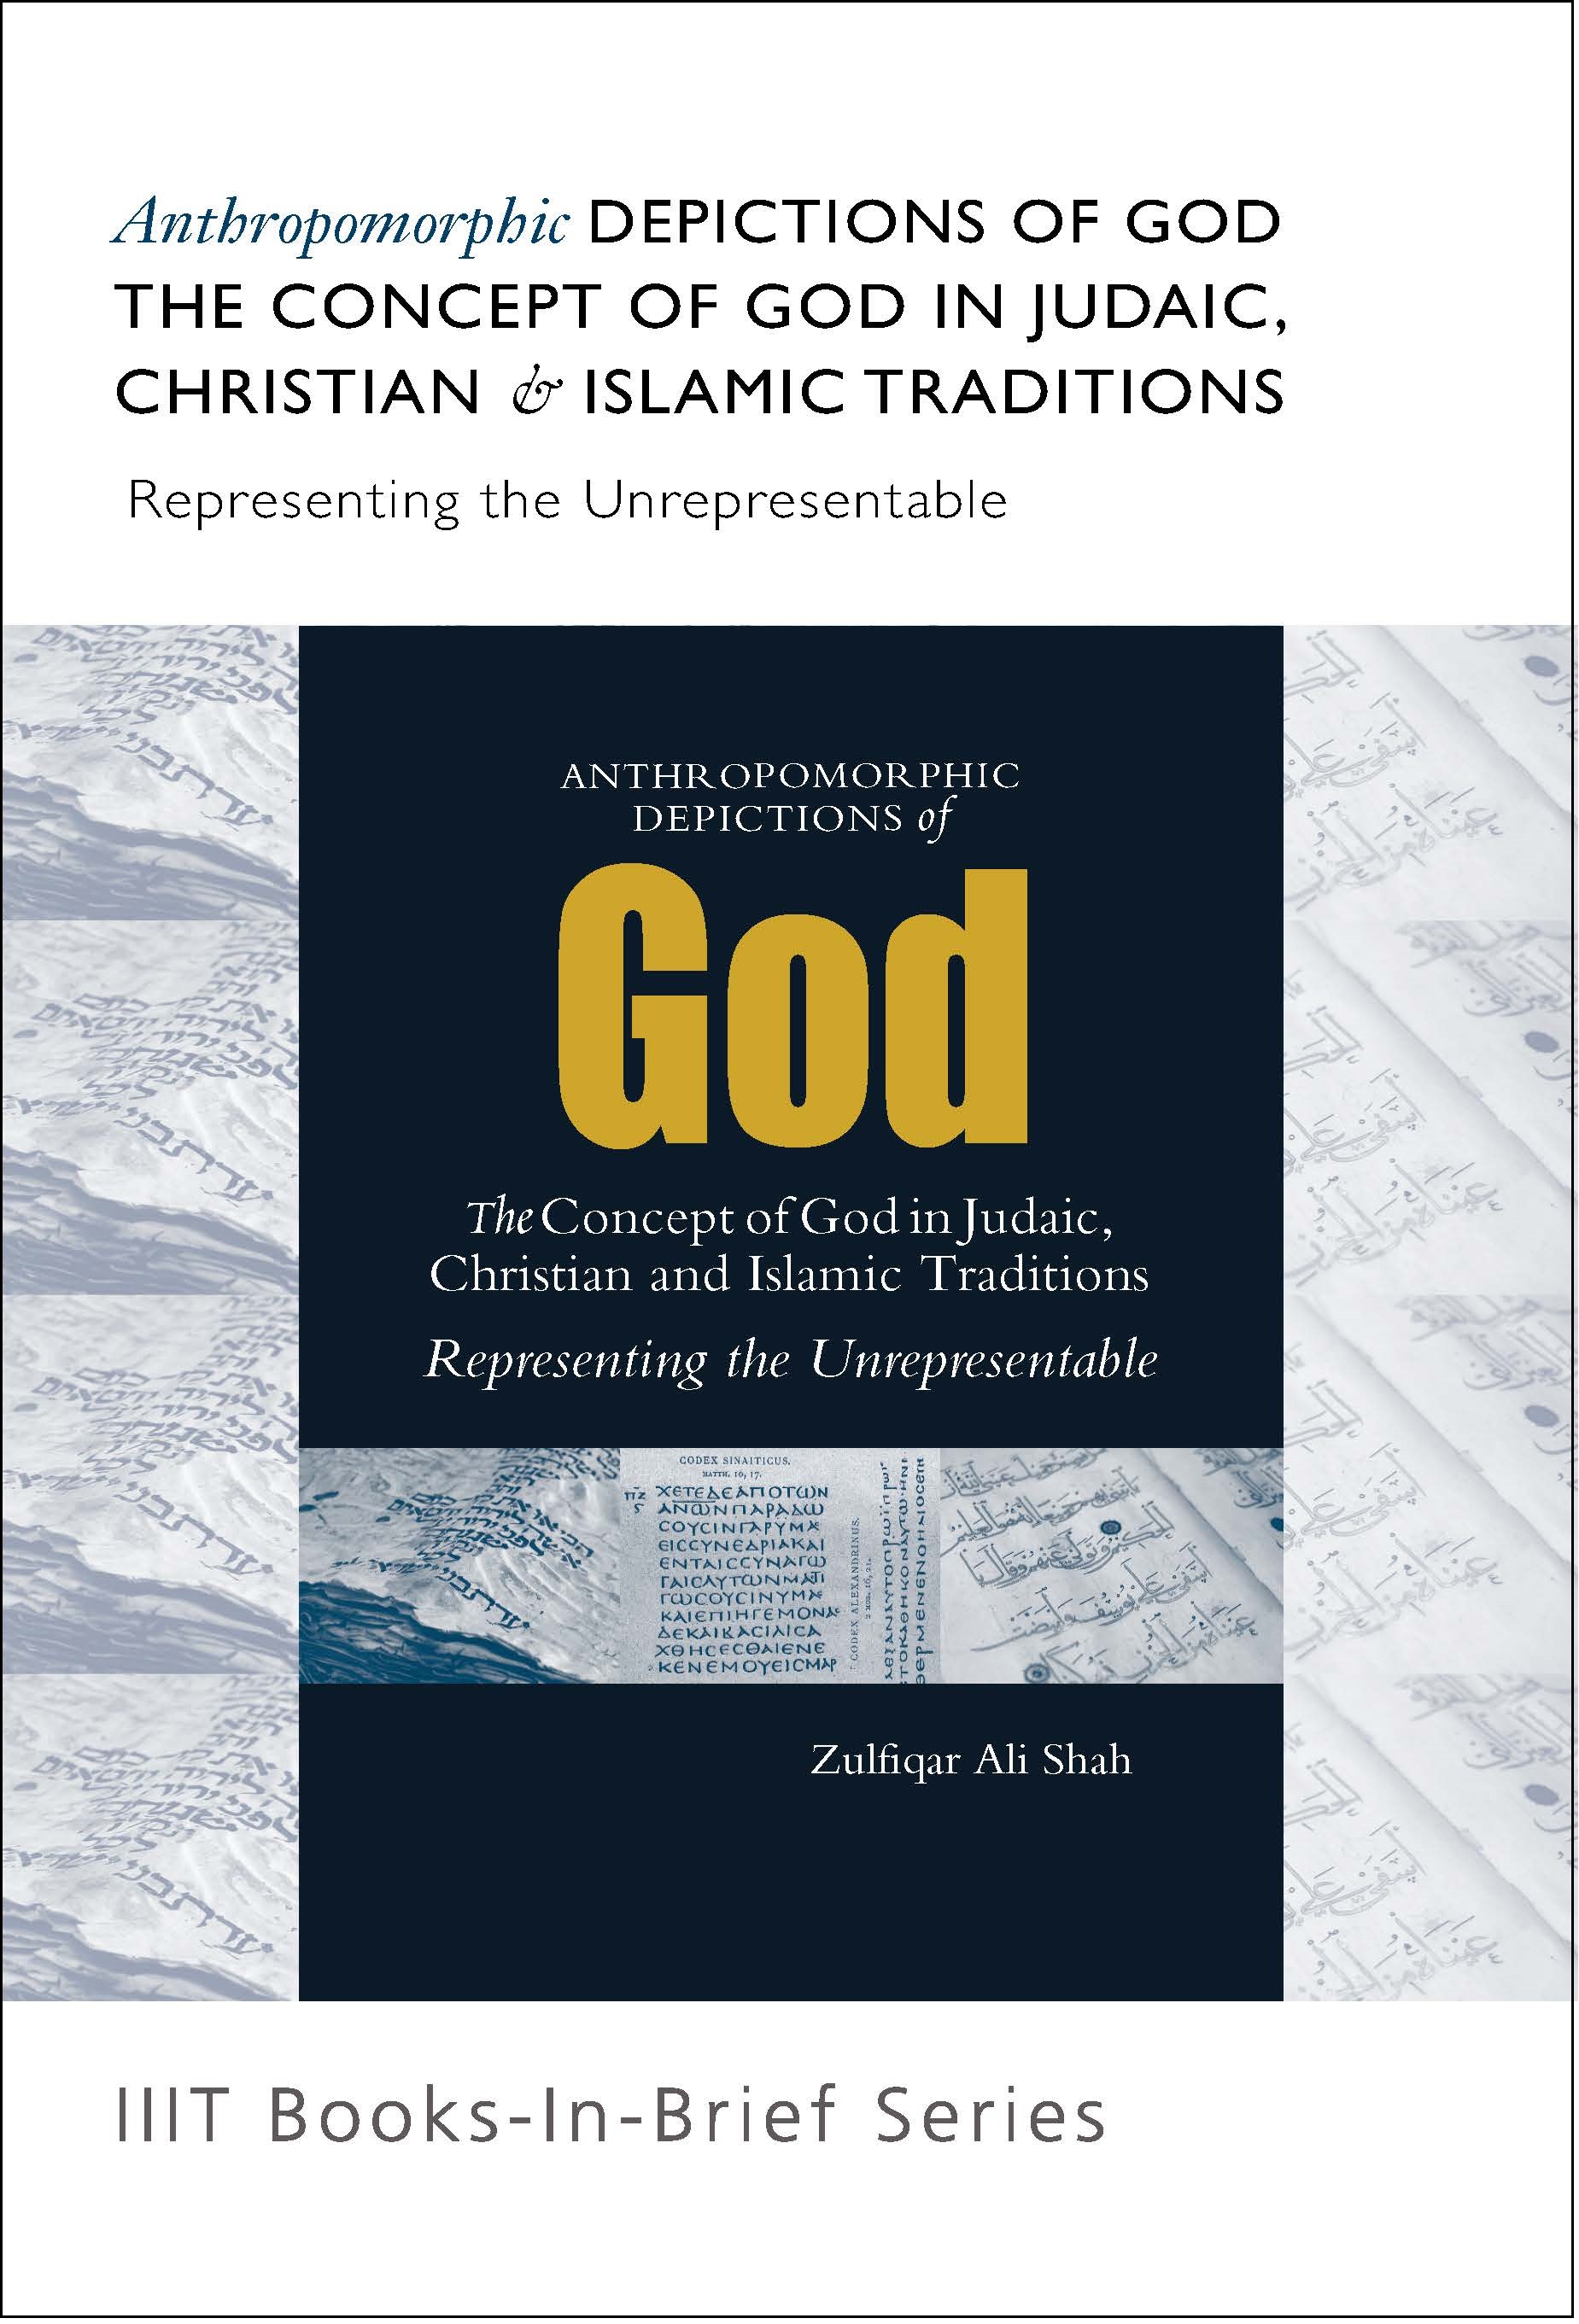 Books-In-Brief: Anthropomorphic Depictions of God: The Concept of God in Judaic, ​Christian and Islamic Traditions: Representing the Unrepresentable